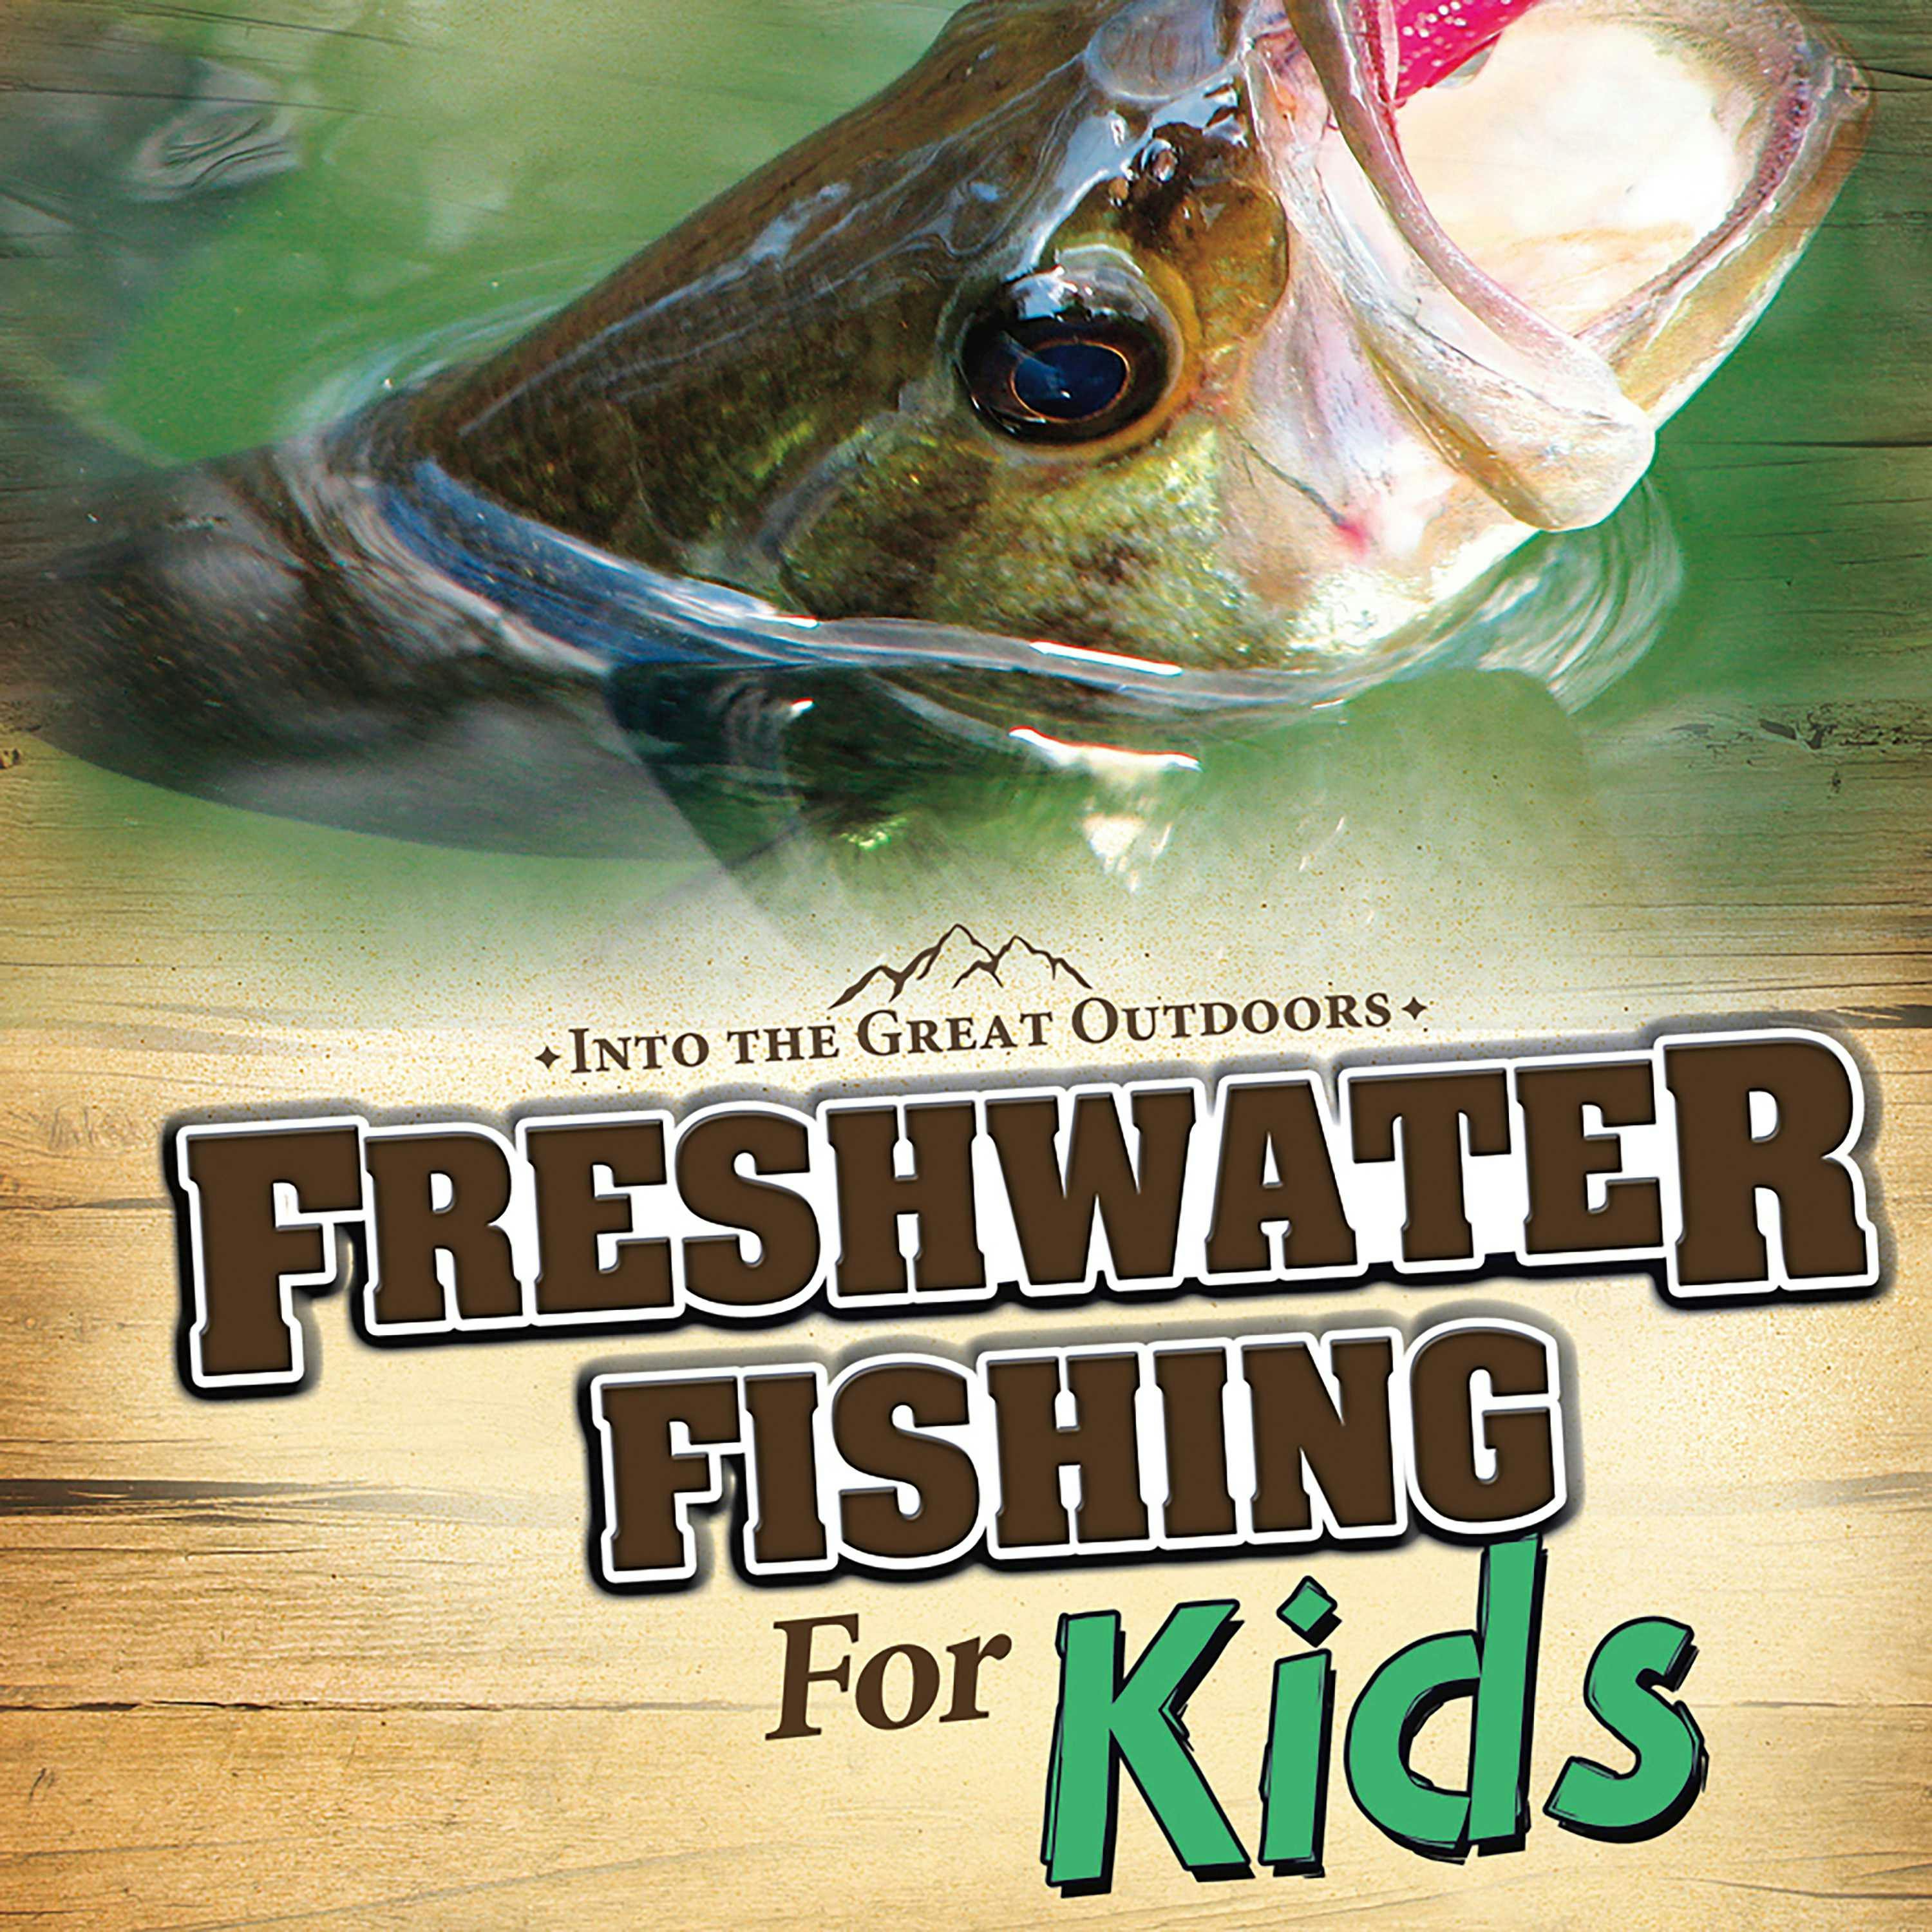 Freshwater Fishing for Kids - undefined